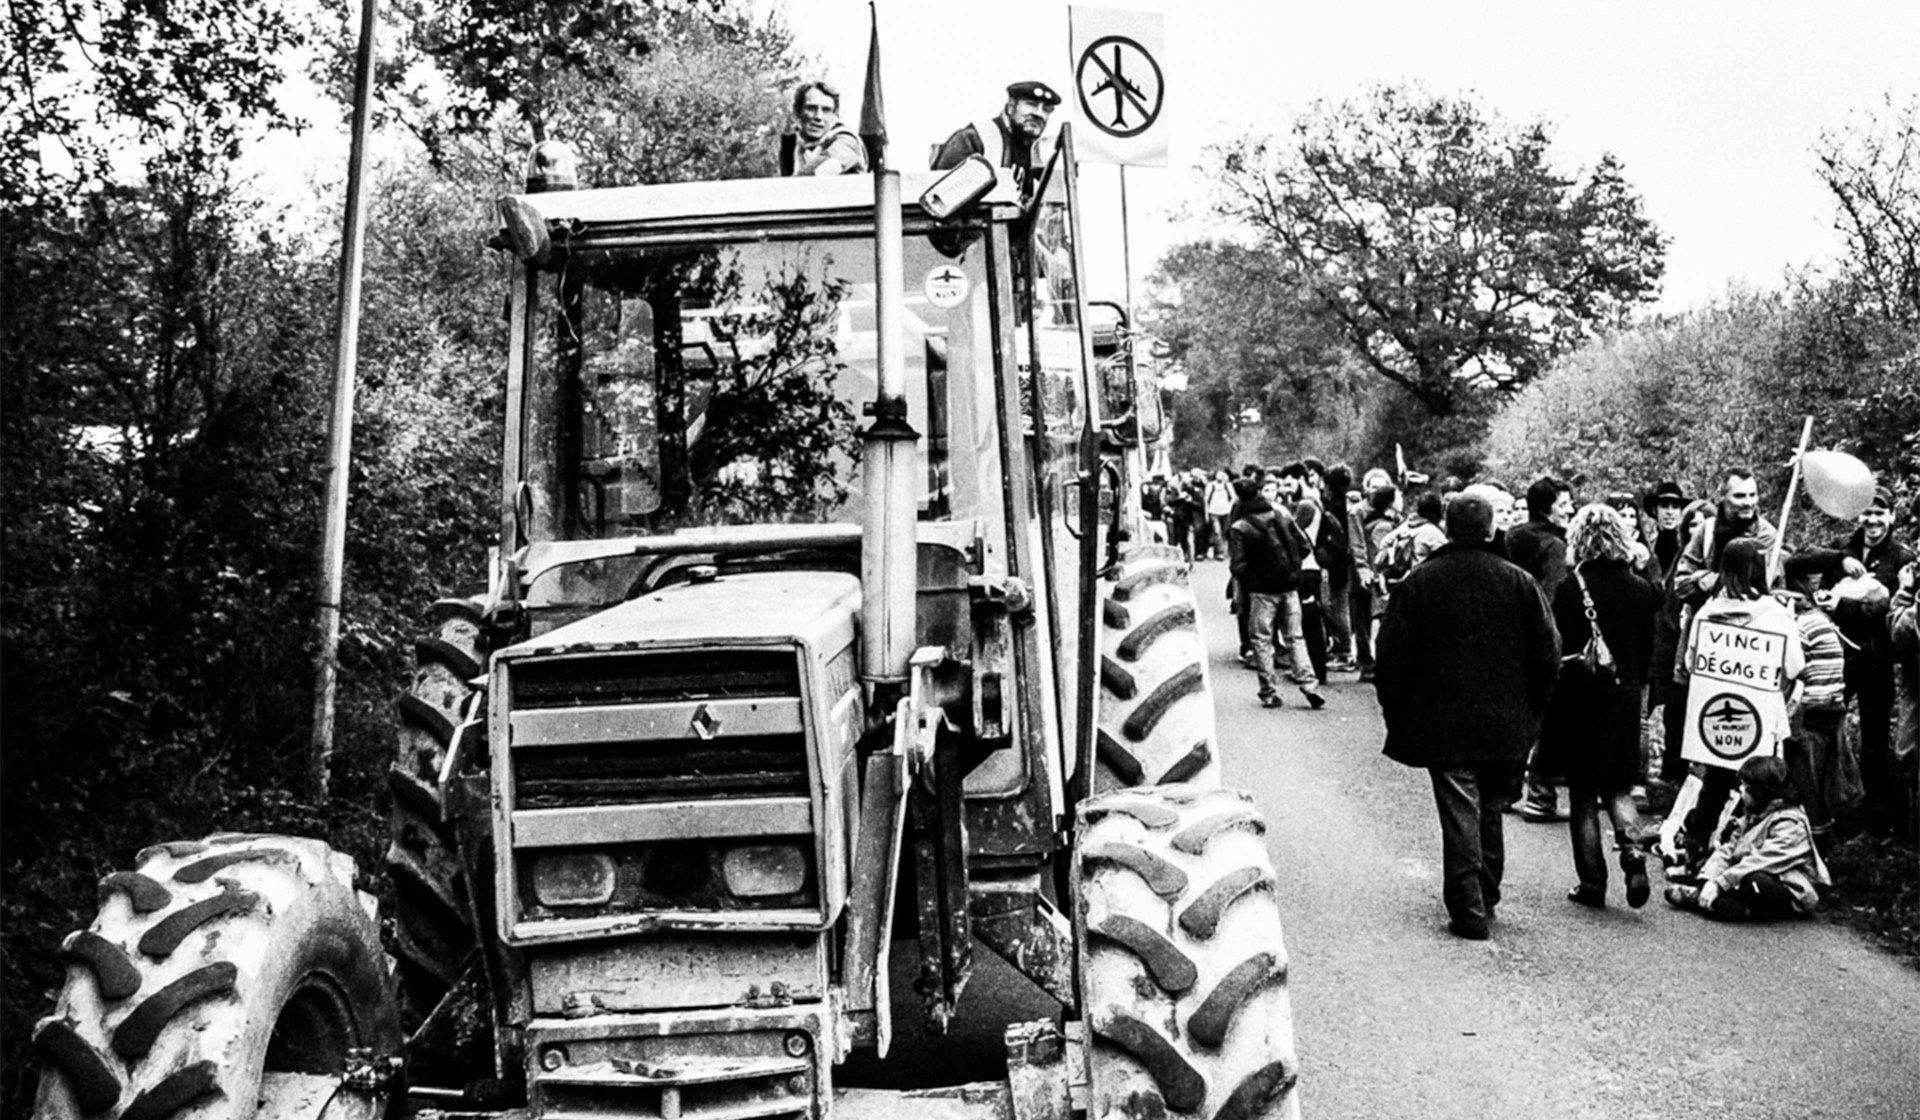 How French commune La ZAD has become a symbol of resistance